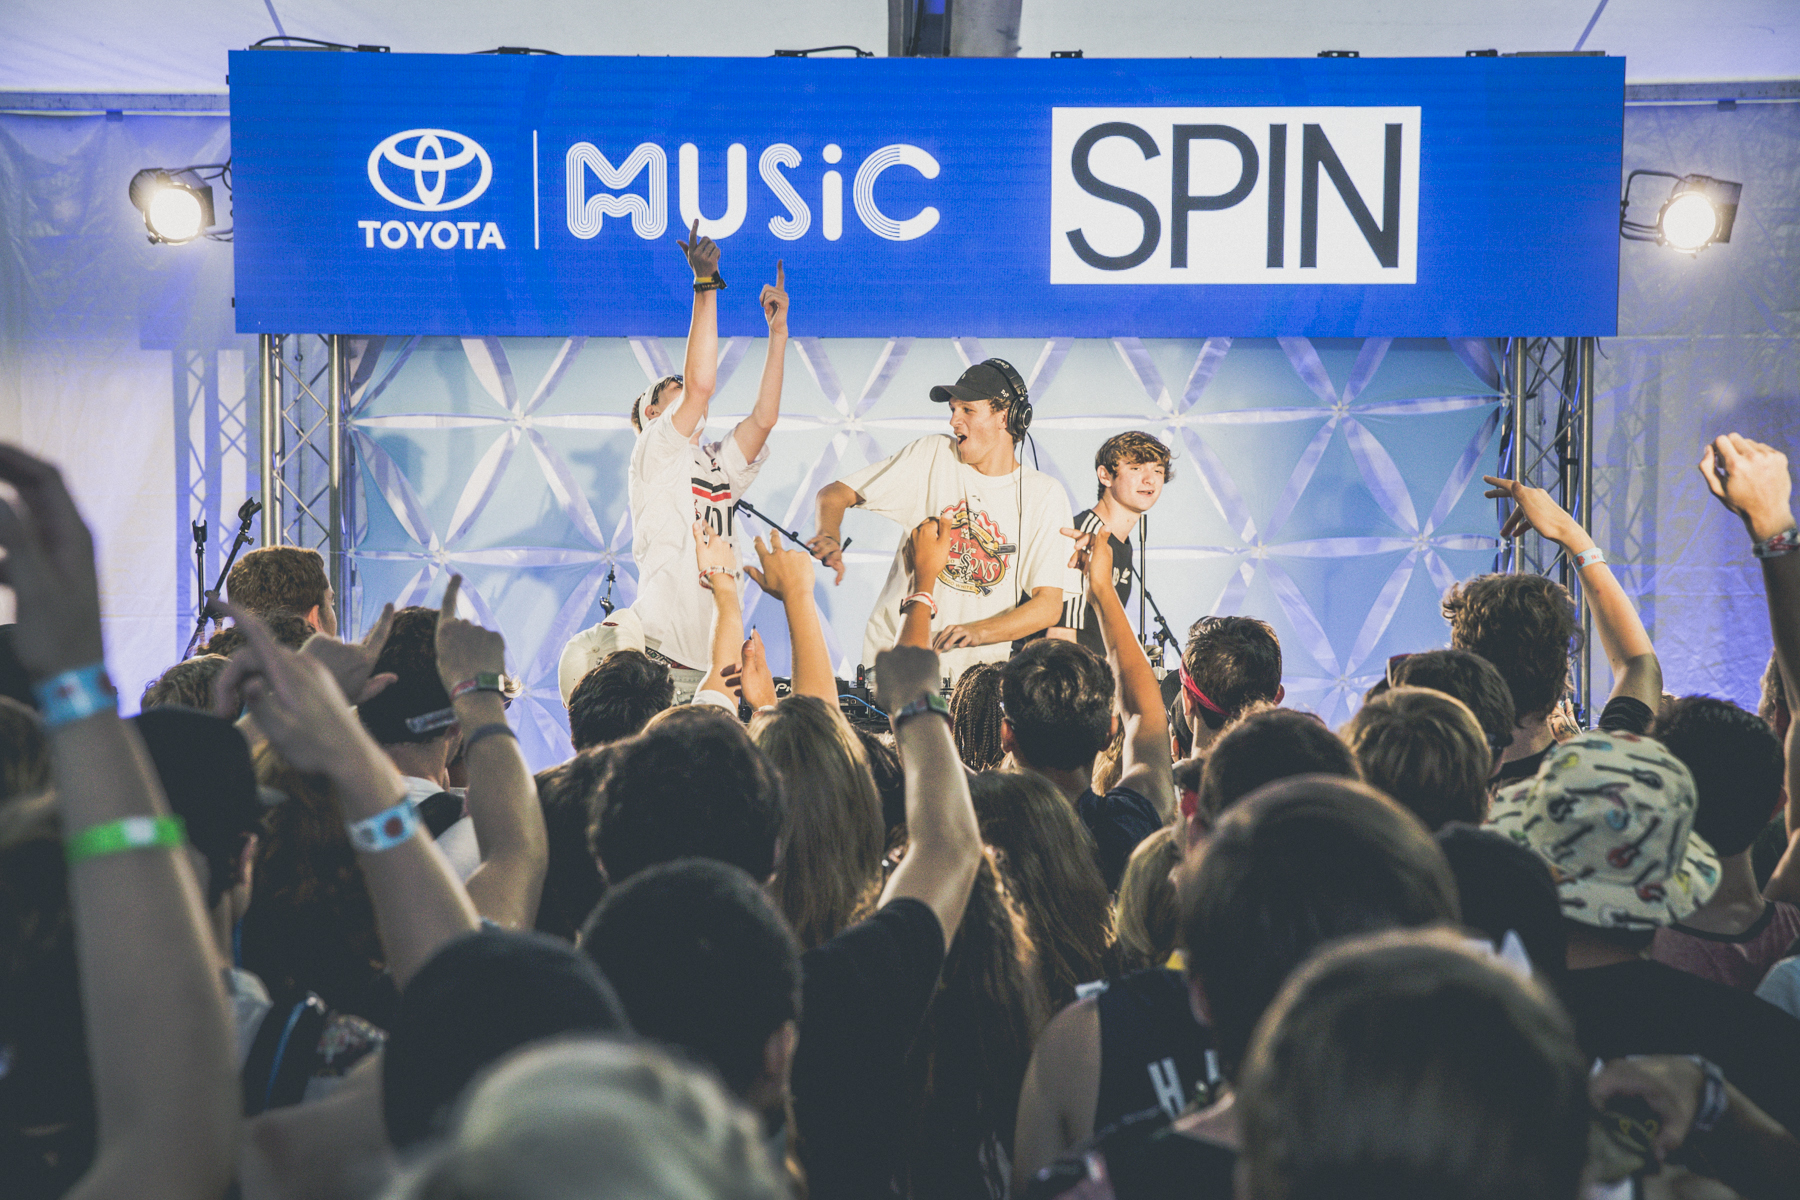 SPIN at Lollapalooza 2016: Day 2 at Toyota Music Den with Frank Turner, Louis the Child, and More